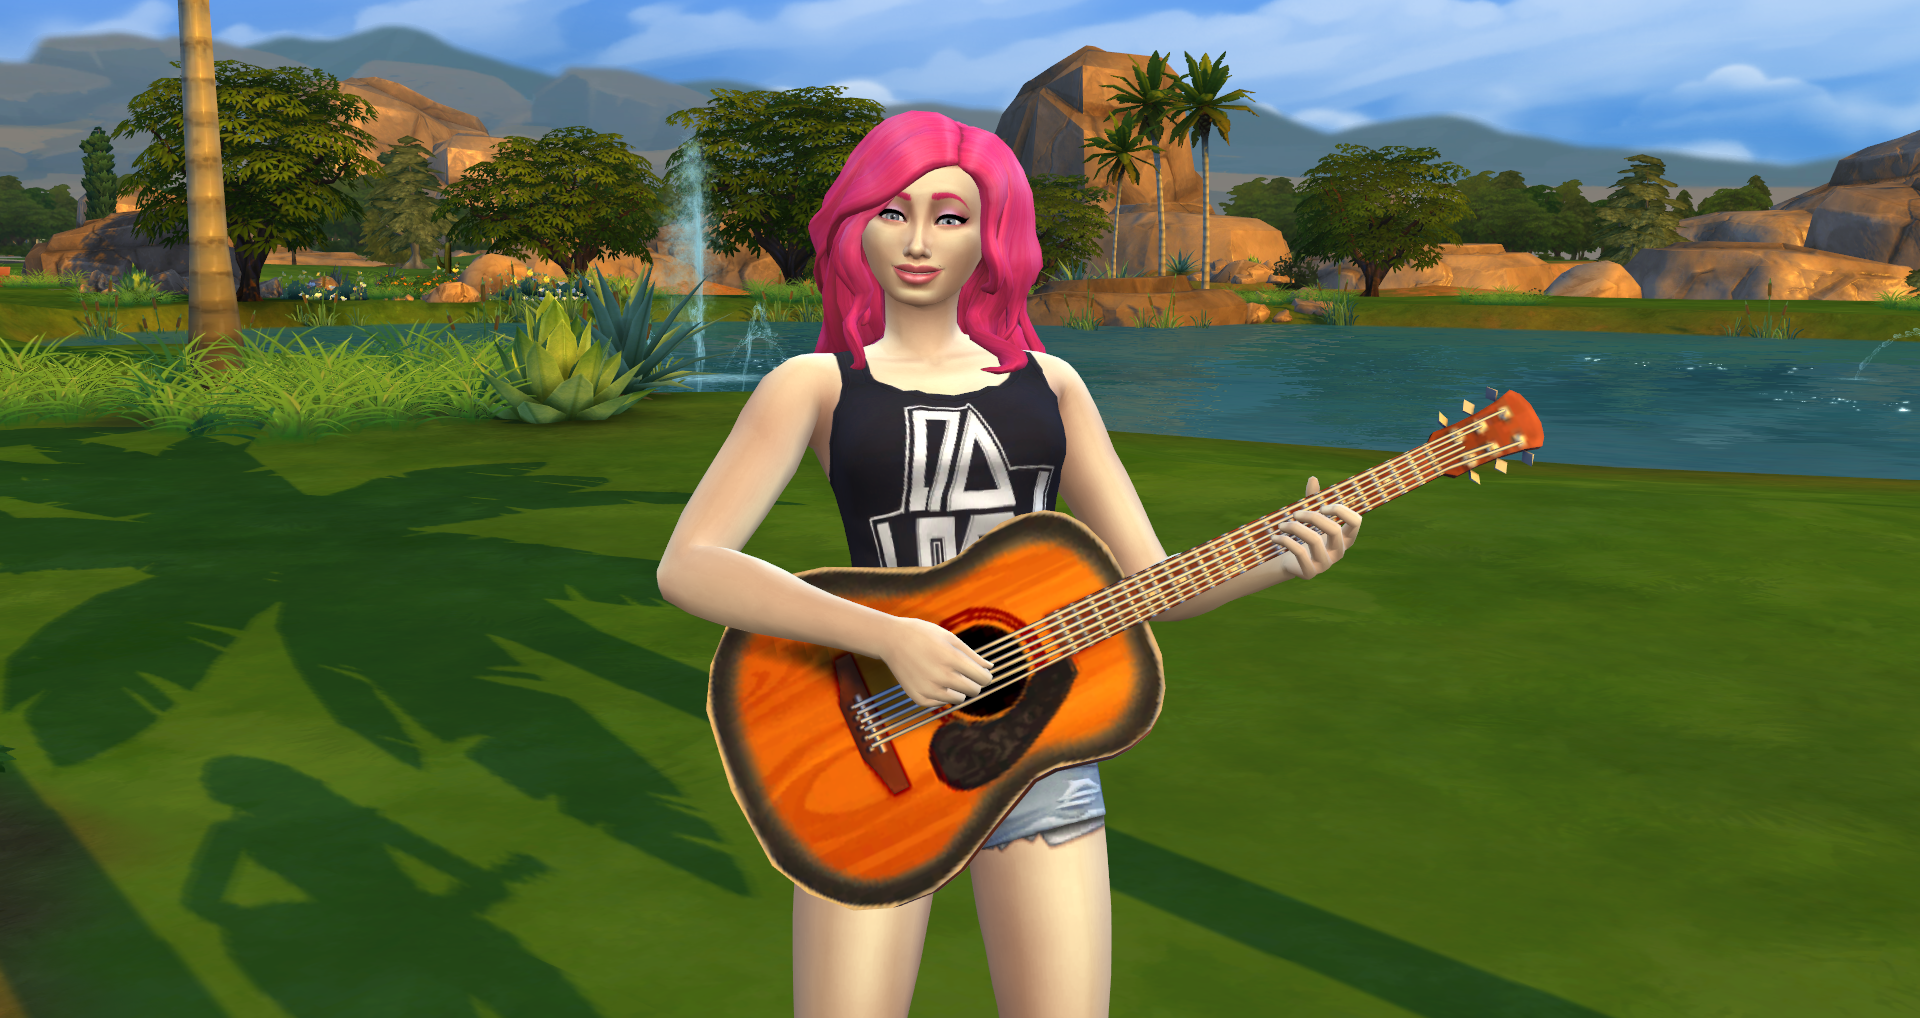 Essential The Sims 4 Mods For Taking In-Game Photos